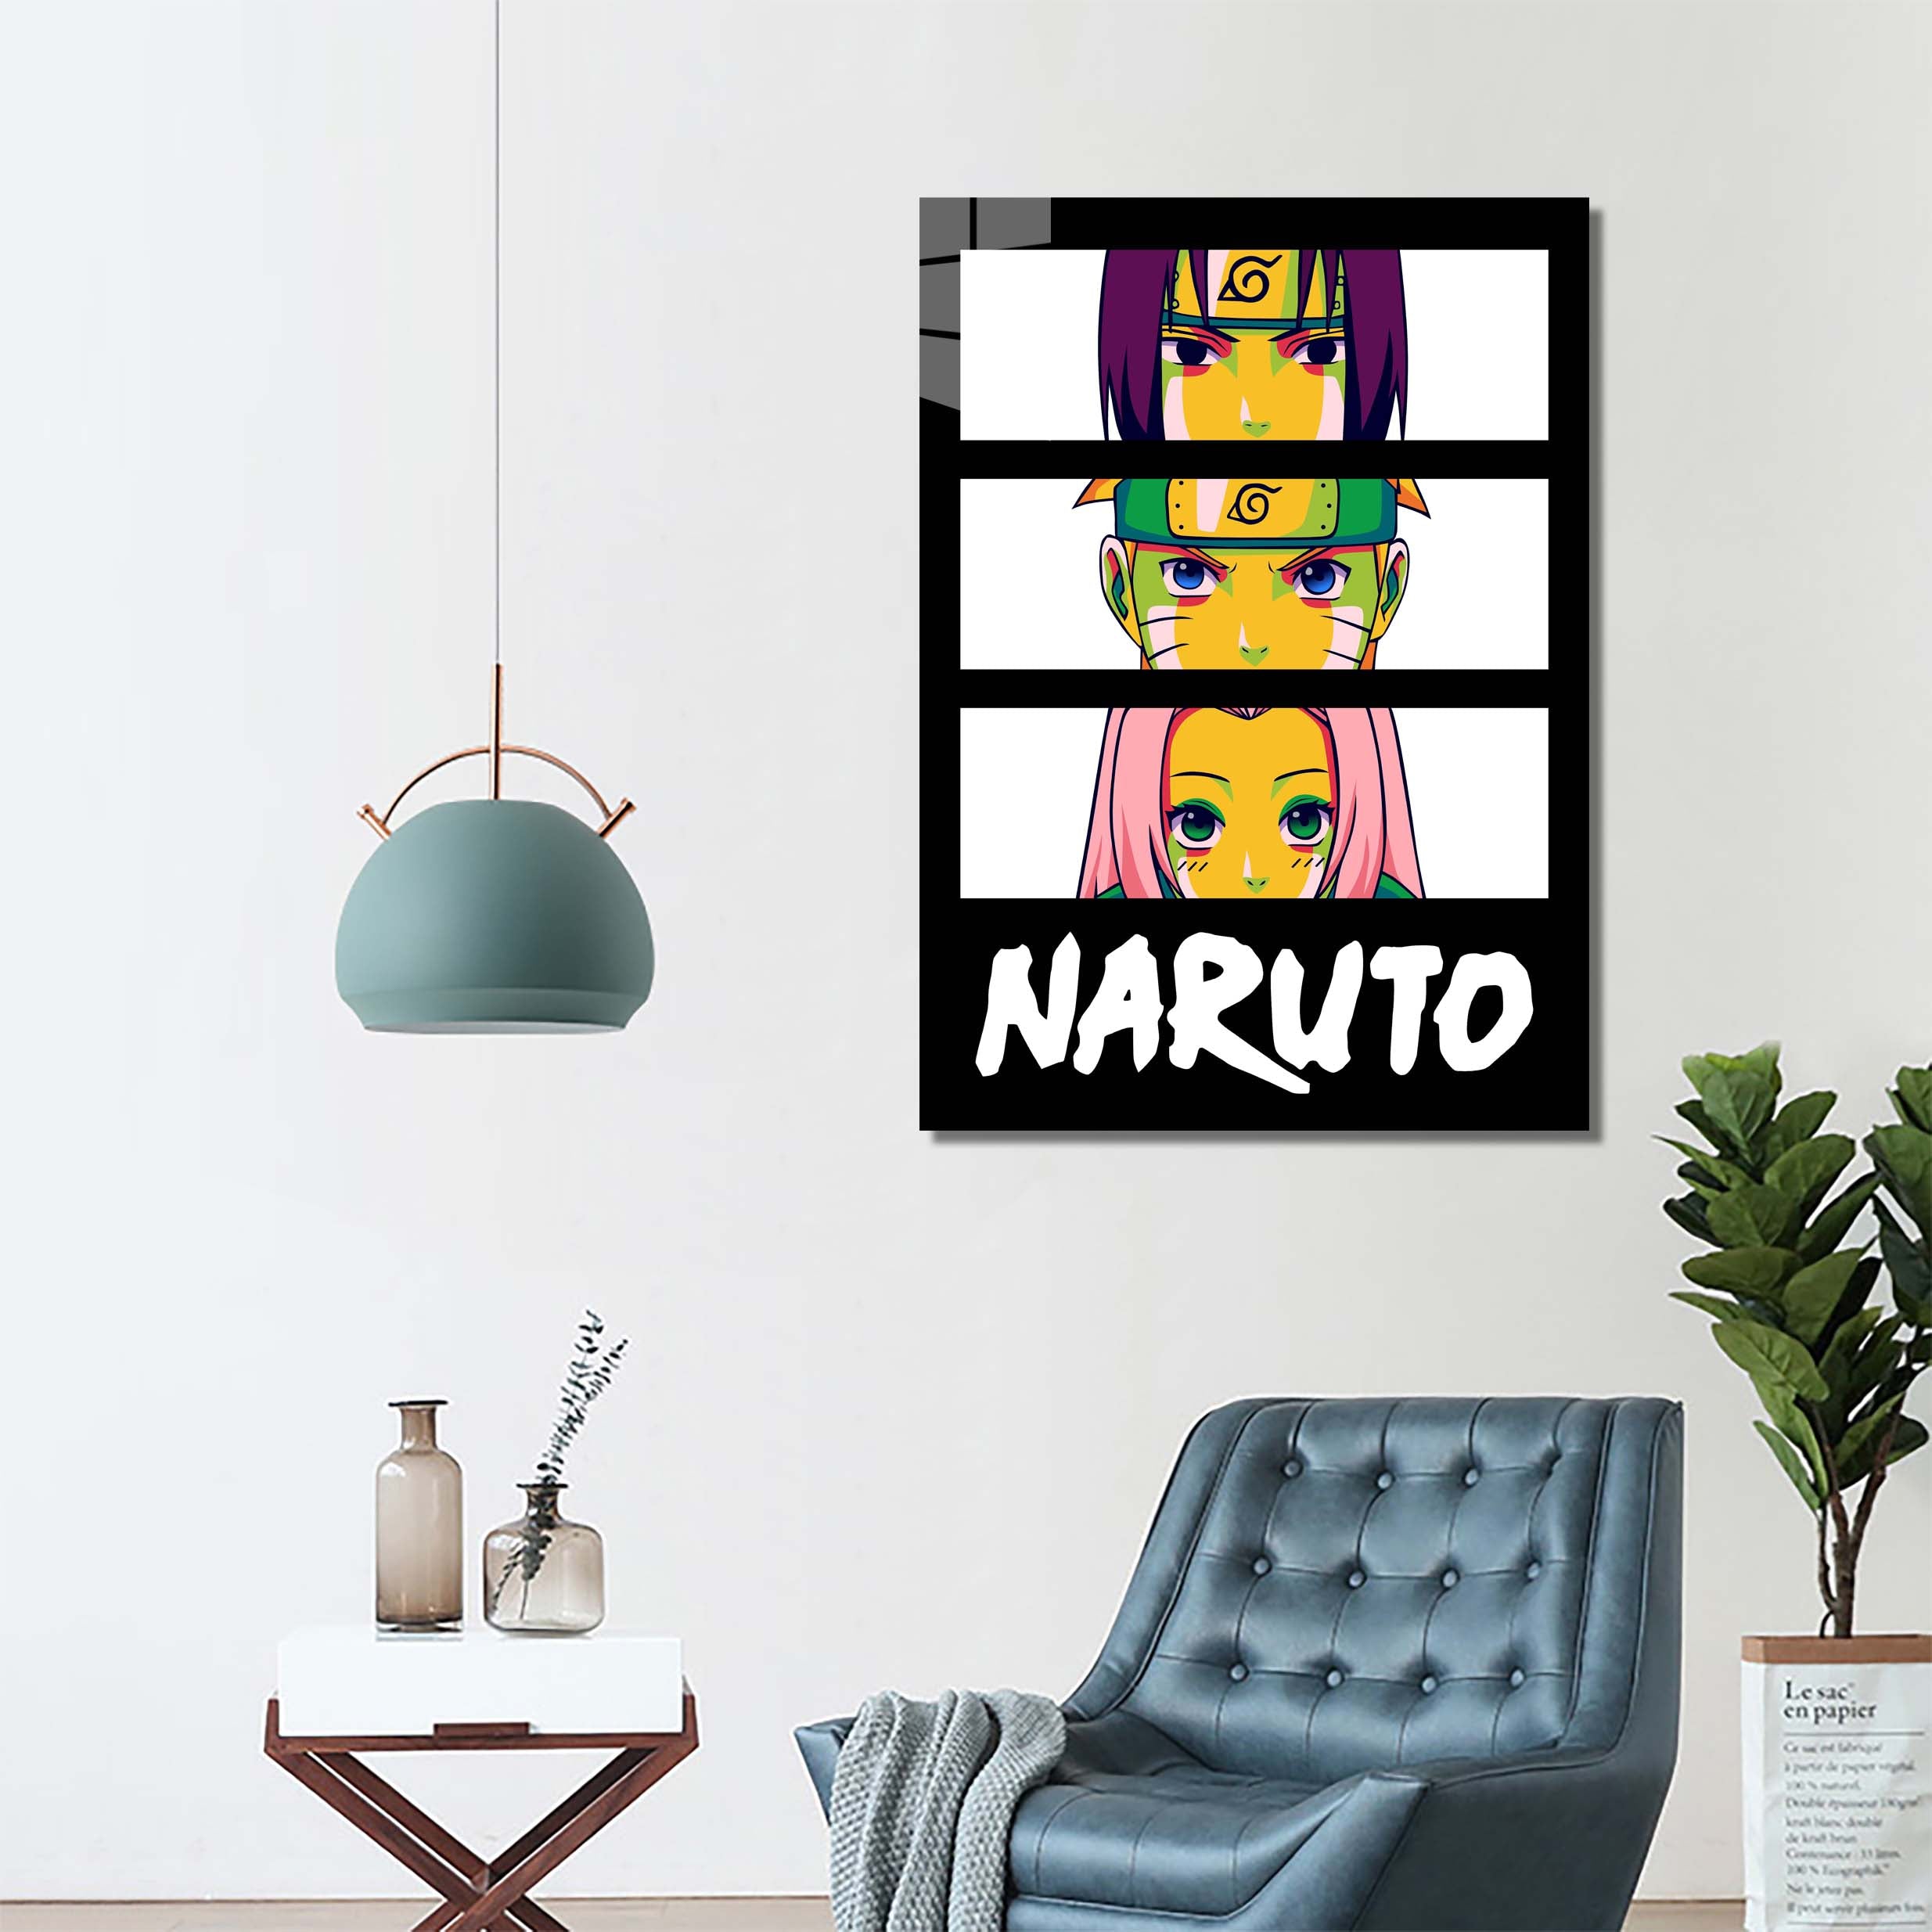 Team 7 Naruto Kids-designed by @PXI7_